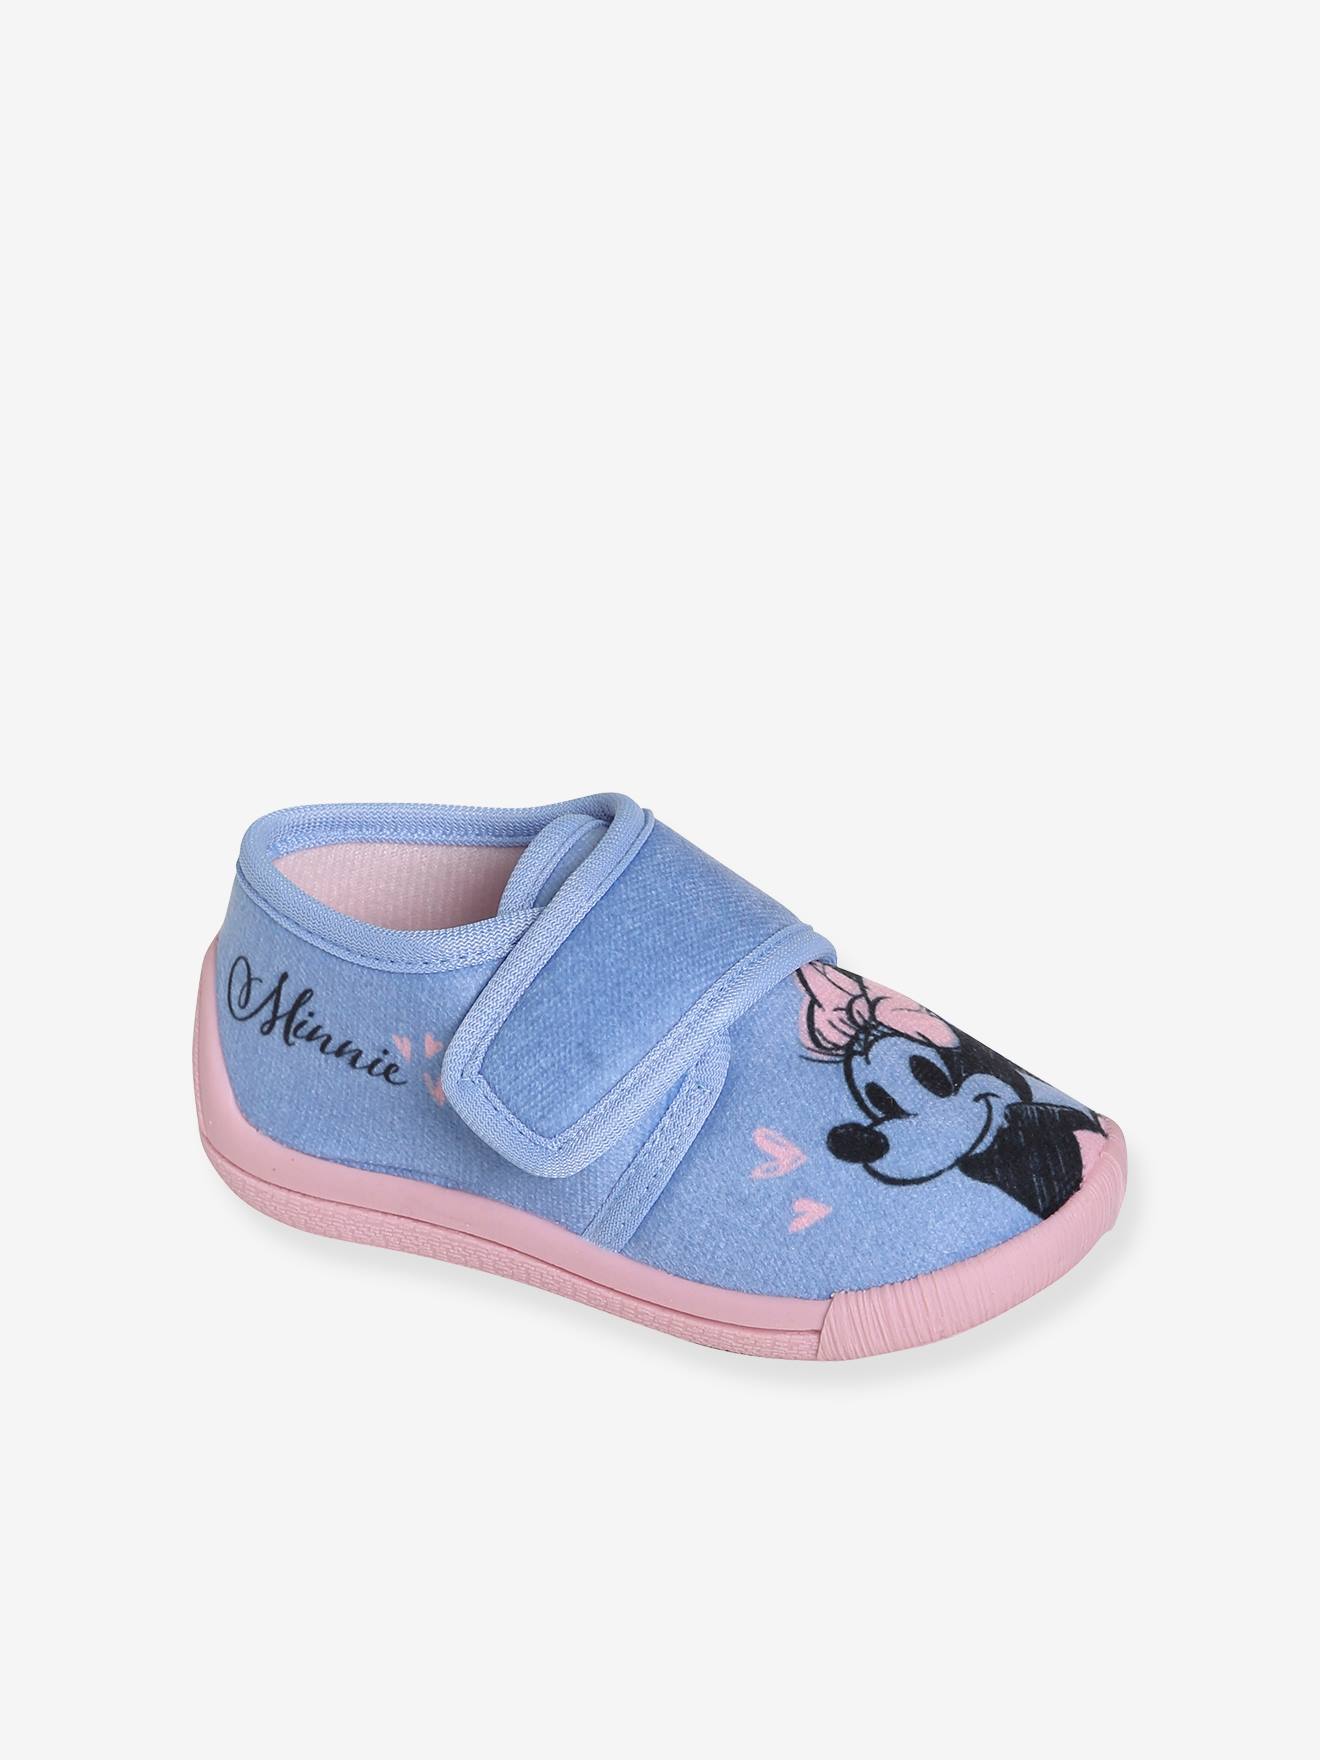 Disney® Minnie Mouse Shoes, for Children blue solid with design, Shoes